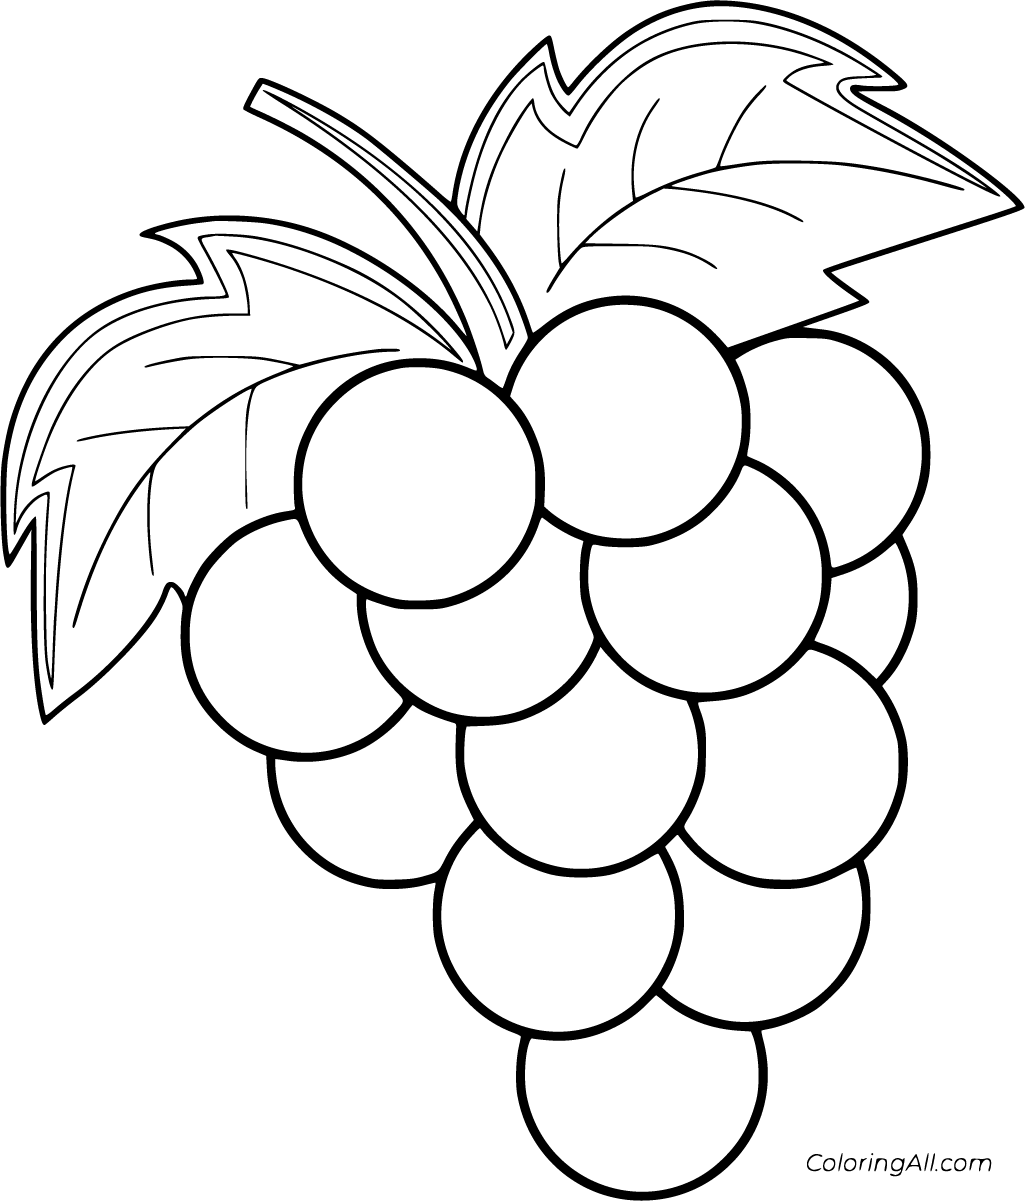 Download Grapes Coloring Pages - ColoringAll